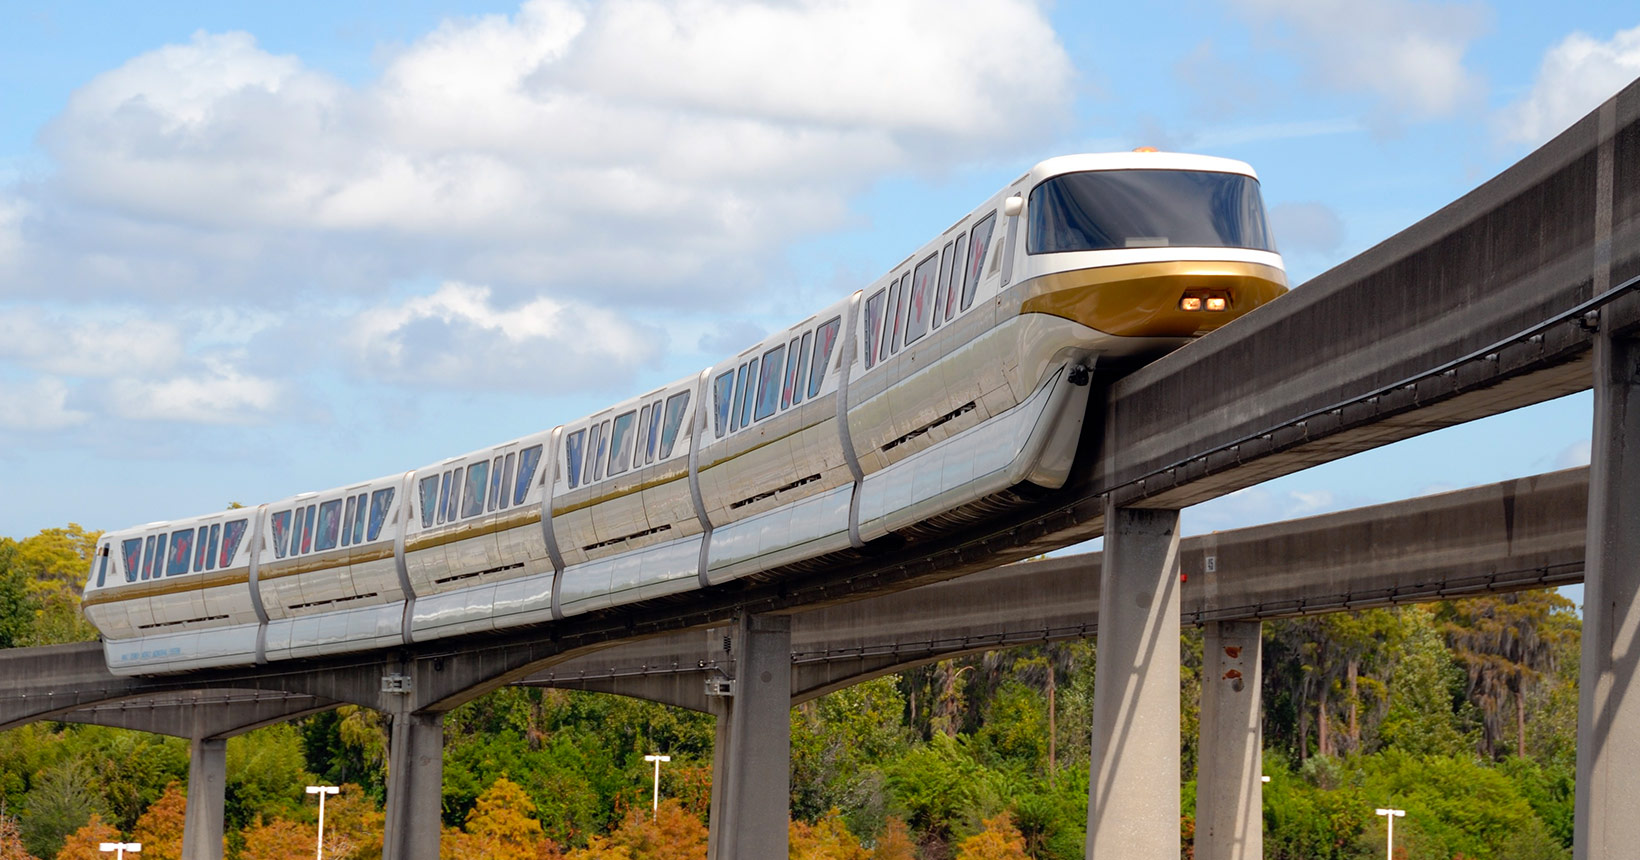 Brazil's Bolsonaro gives go-ahead for monorail at São Paulo's Guarulhos Airport on Wednesday